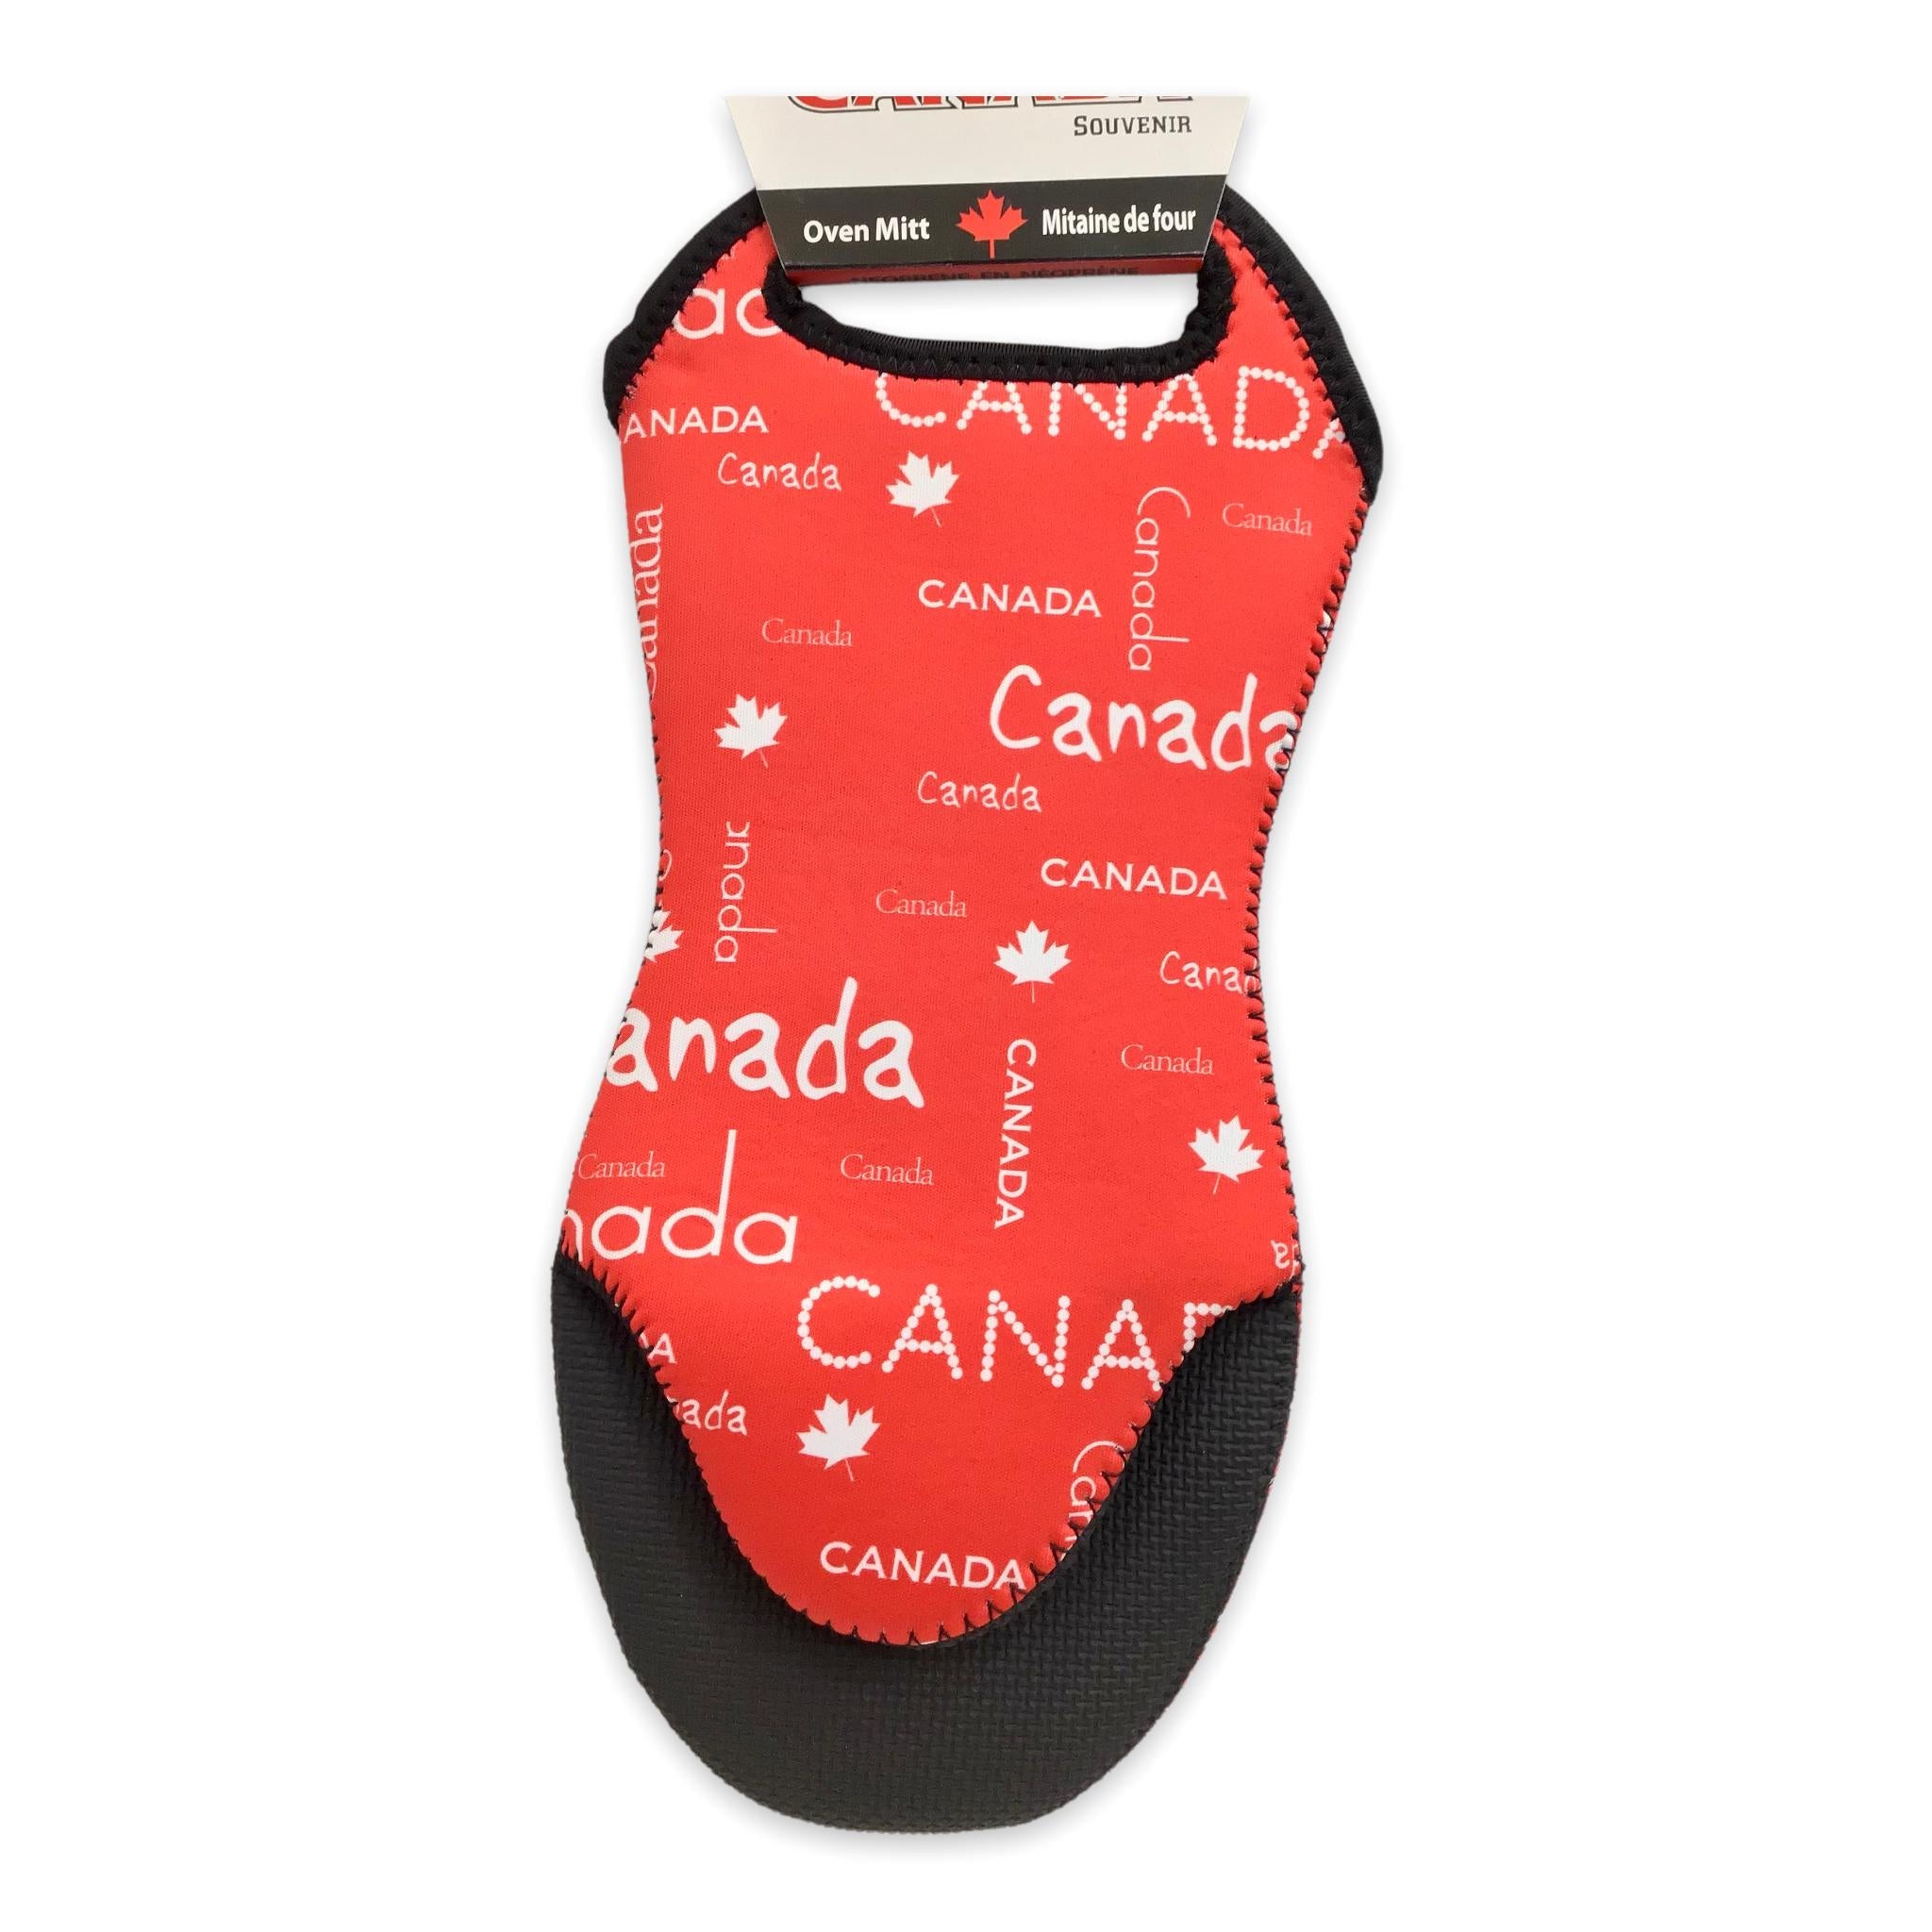 Oven Mitt Canada red silicone found on gripping side. Constructed of 100% Neoprene | Mitaine de four Souvenir Canada